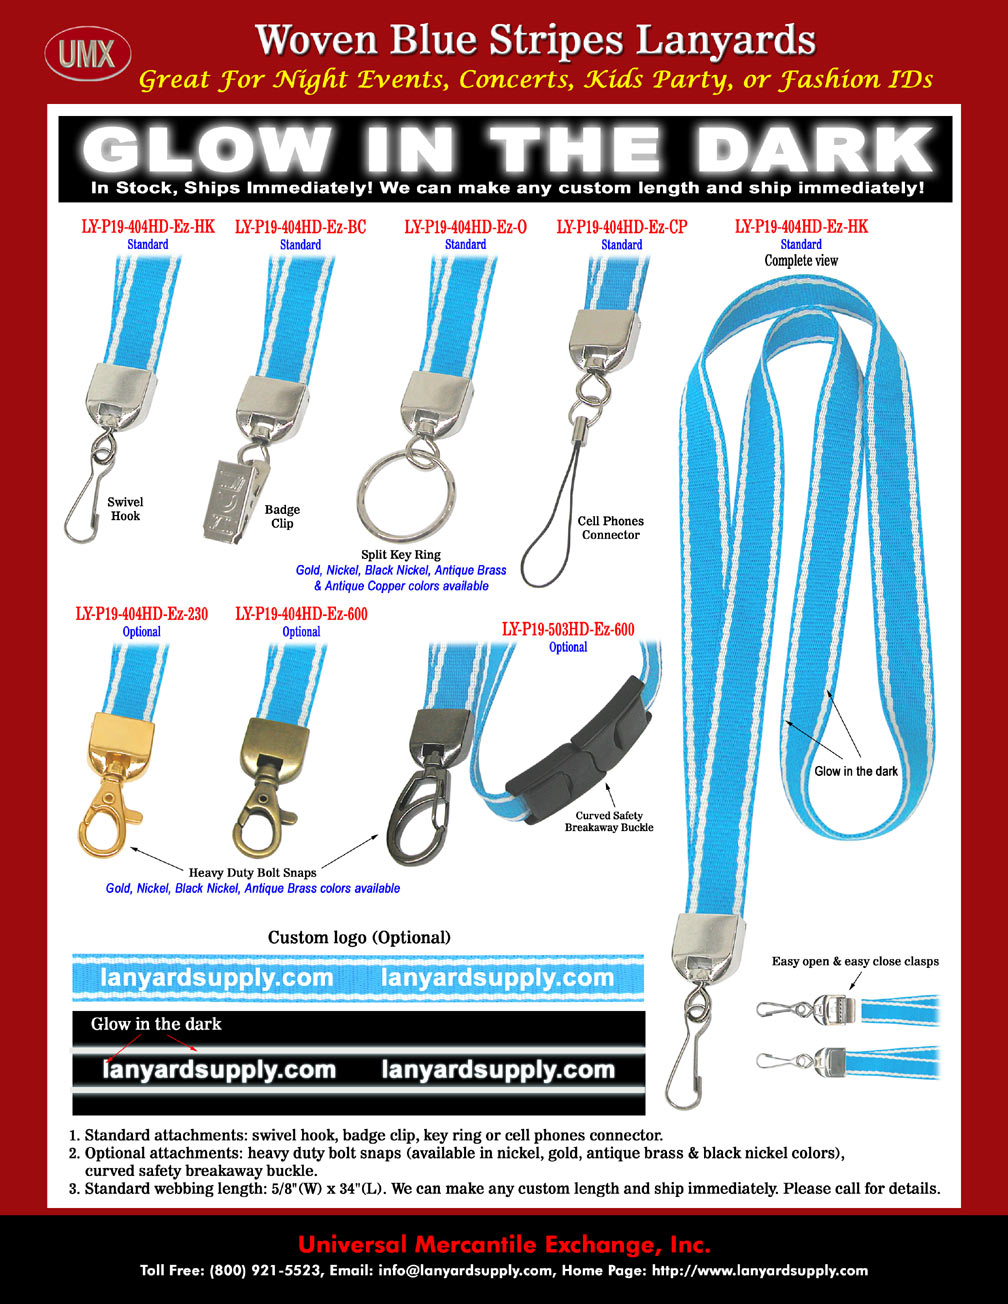 The 5/8" wide by 34" long Pantone process blue lanyard straps come with two woven-in glow in the dark stripes! 